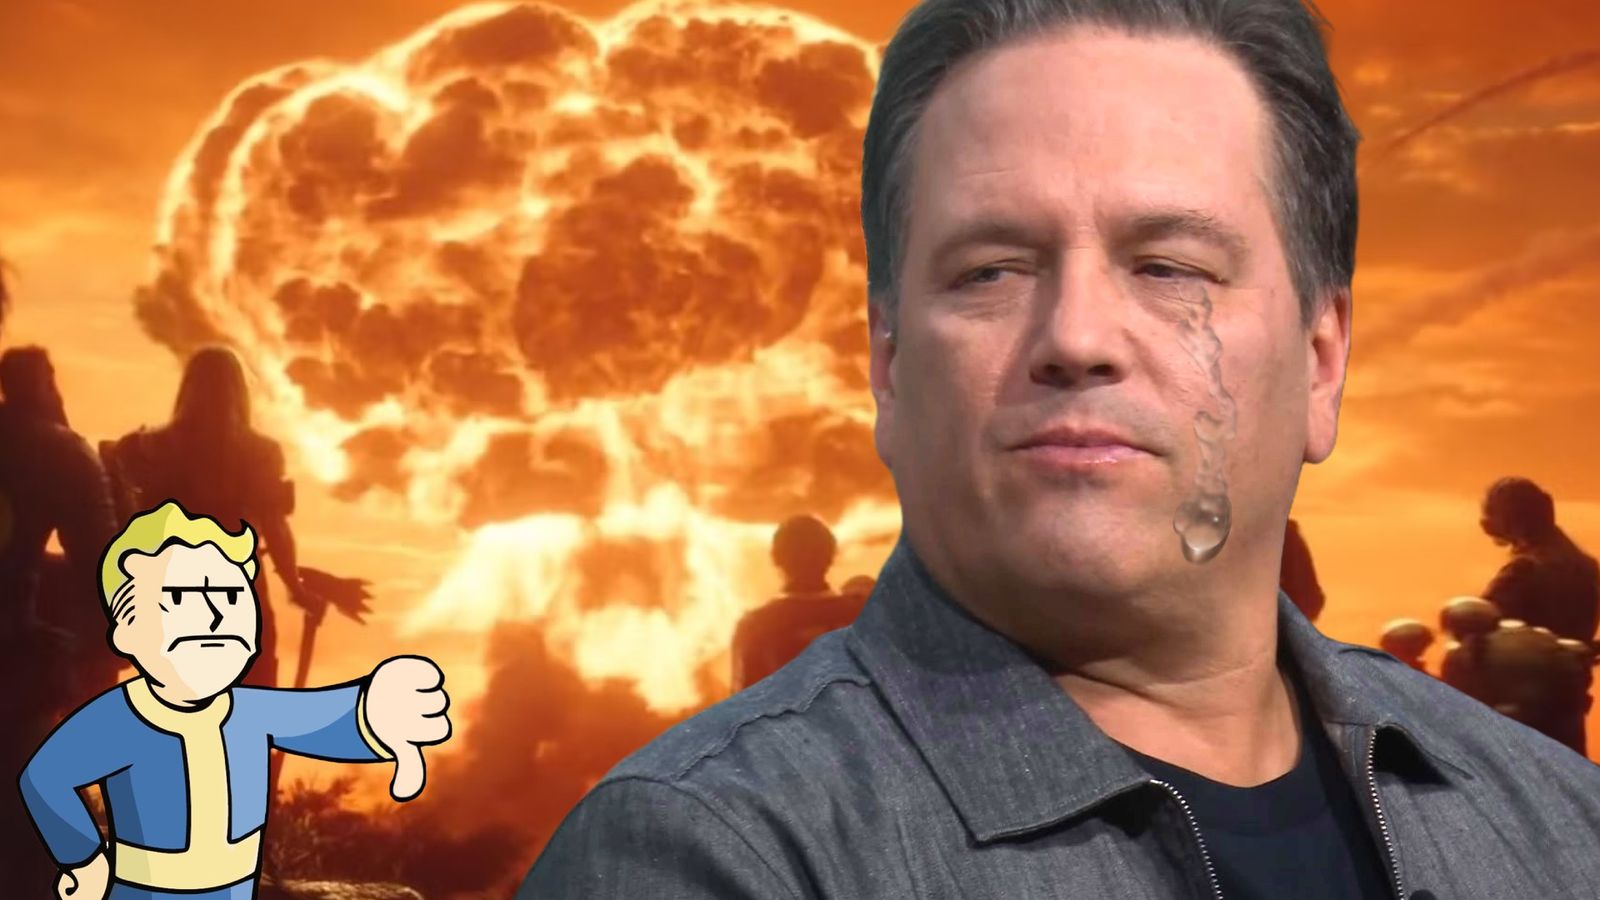 Phil Spencer crying as a Fallout 76 Nuke explodes behind him; Vault Boy stands to the side giving the Xbox boss a “thumbs down”